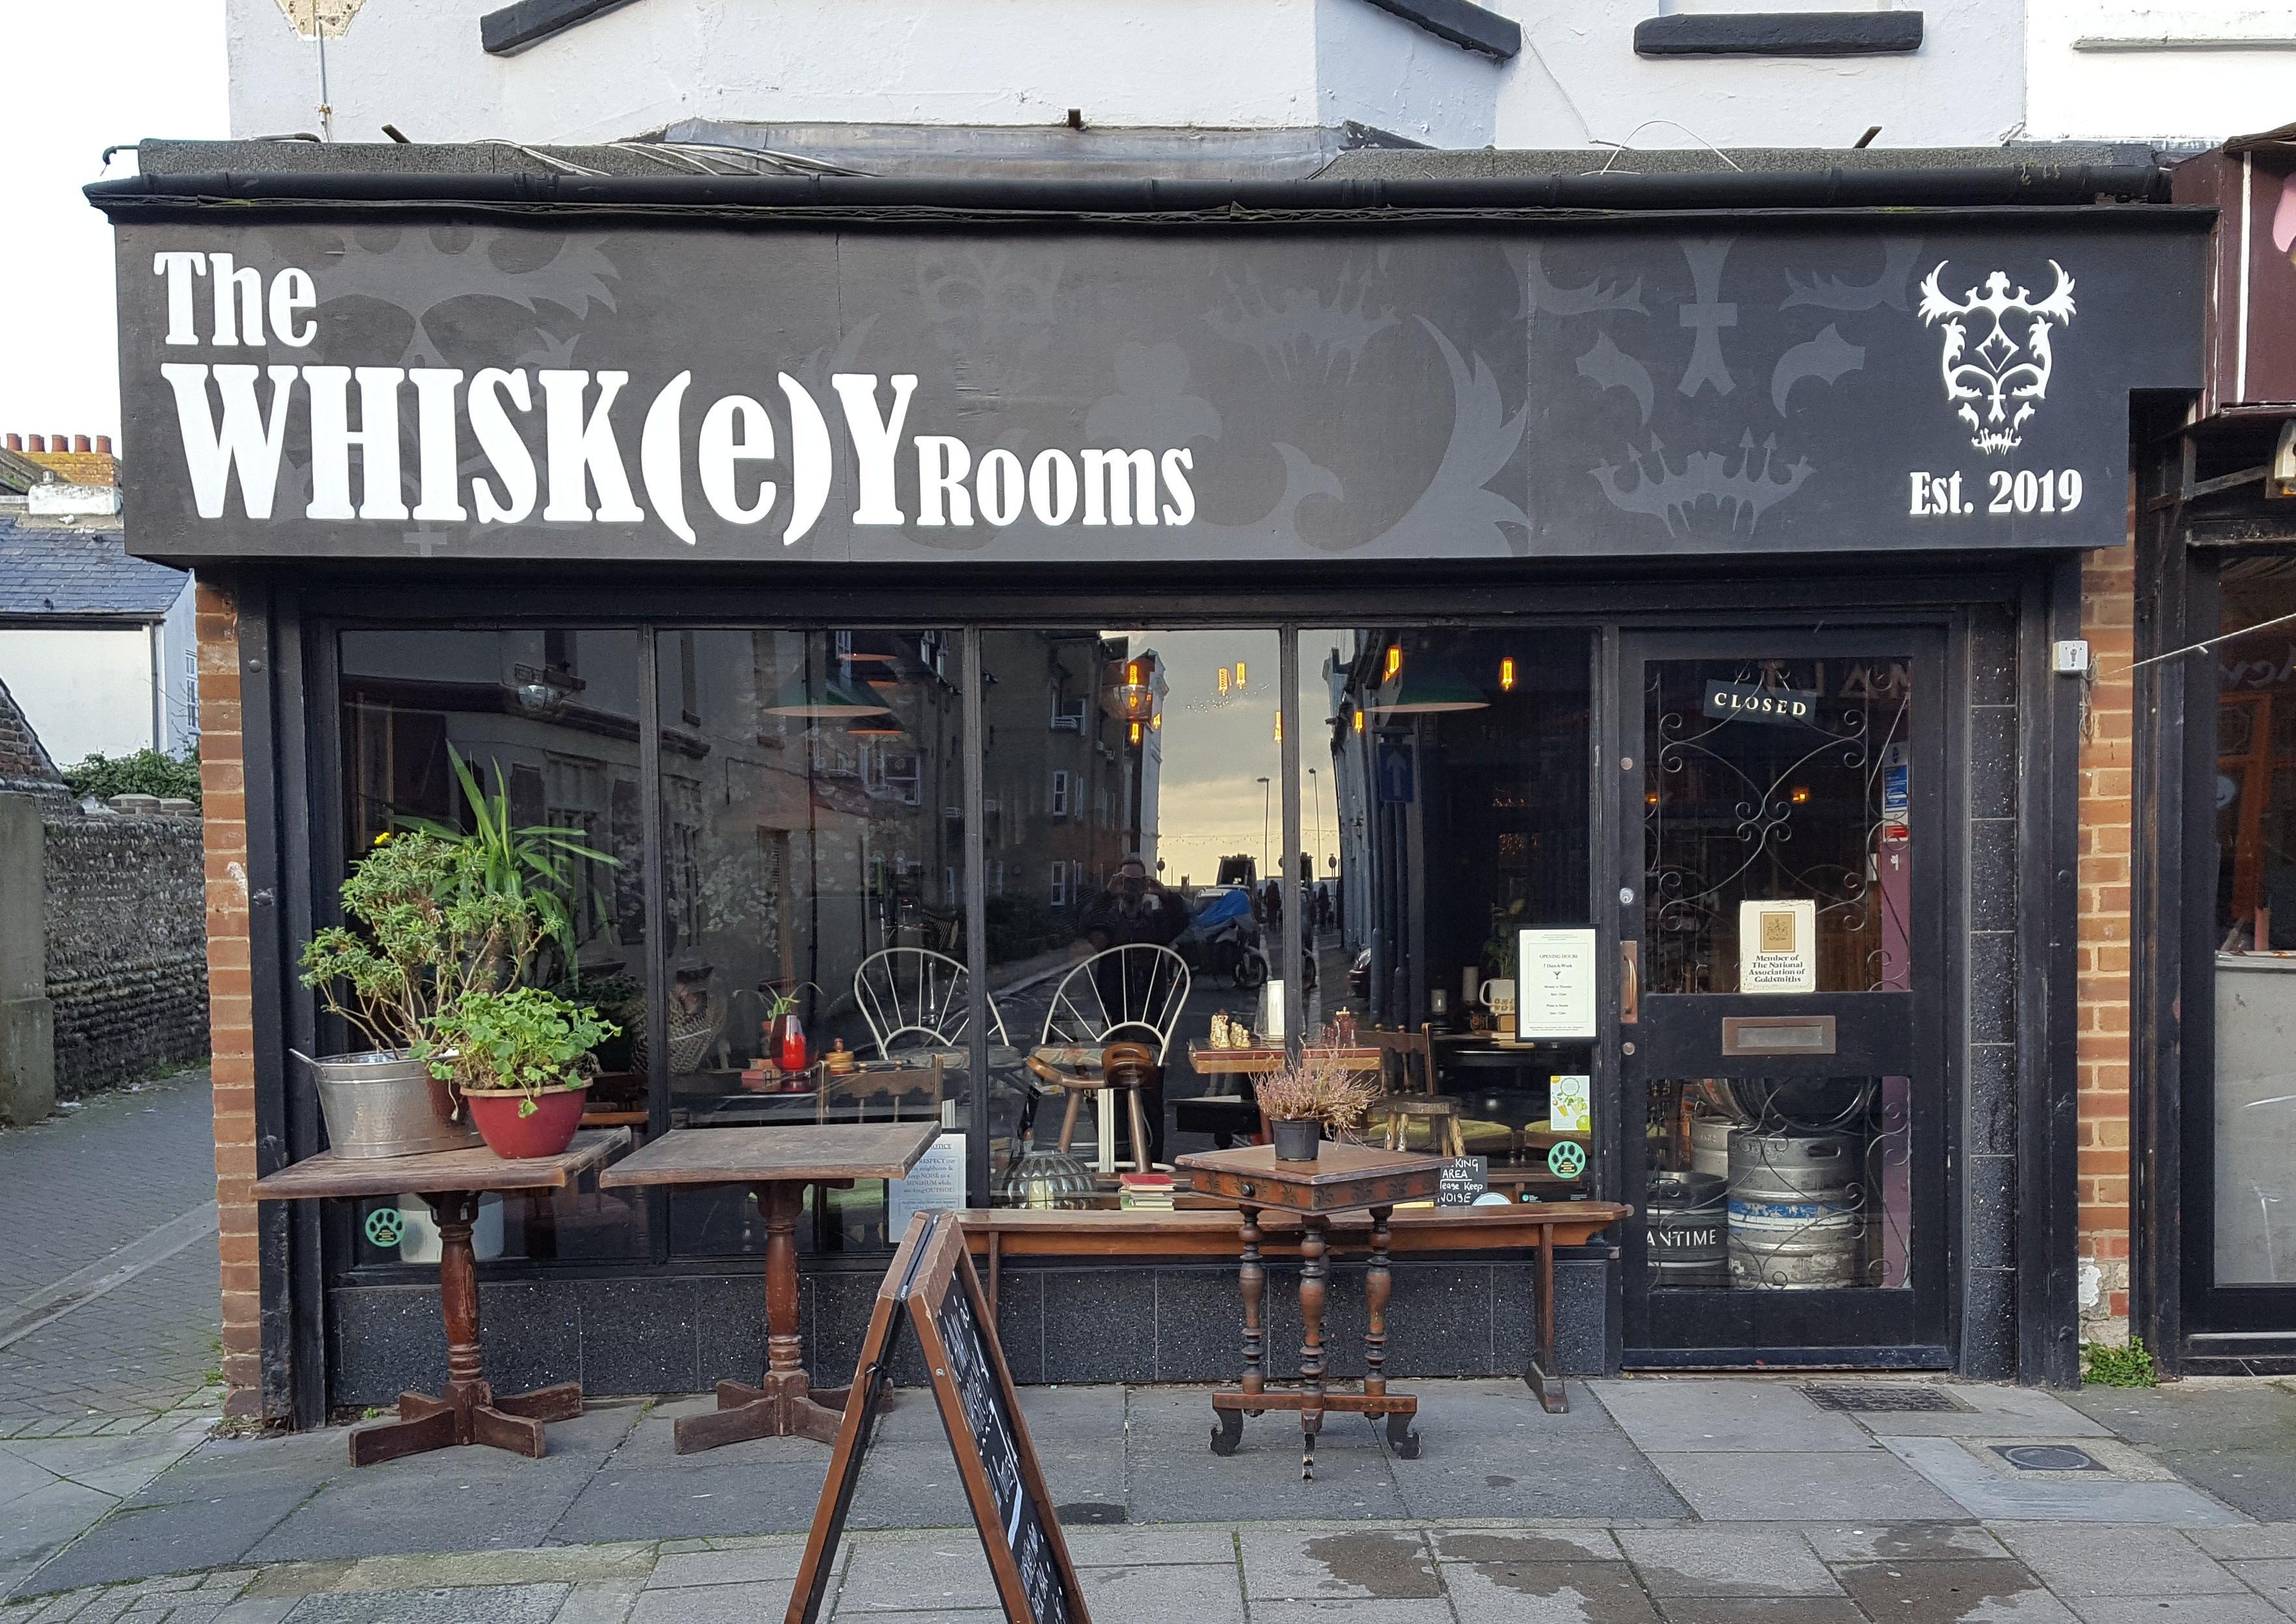 The Whiskey Rooms promised to 'offer something different' when it opened in April 2019